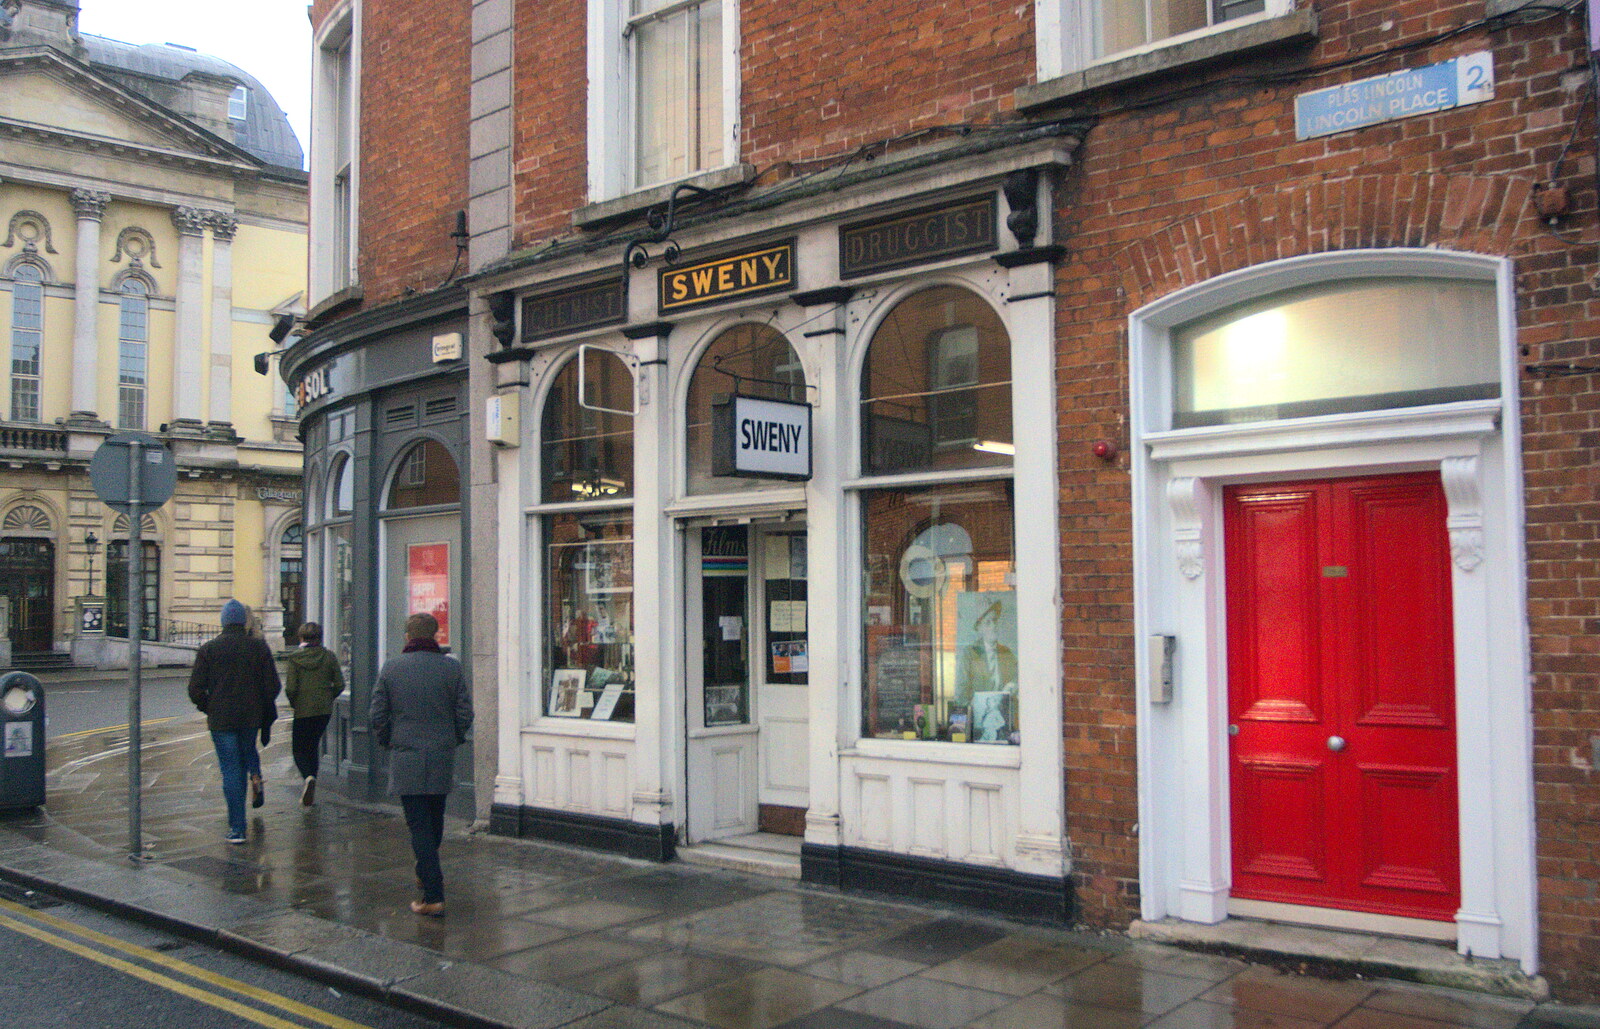 A shop called Sweny from Christmas Eve in Dublin and Blackrock, Ireland - 24th December 2015